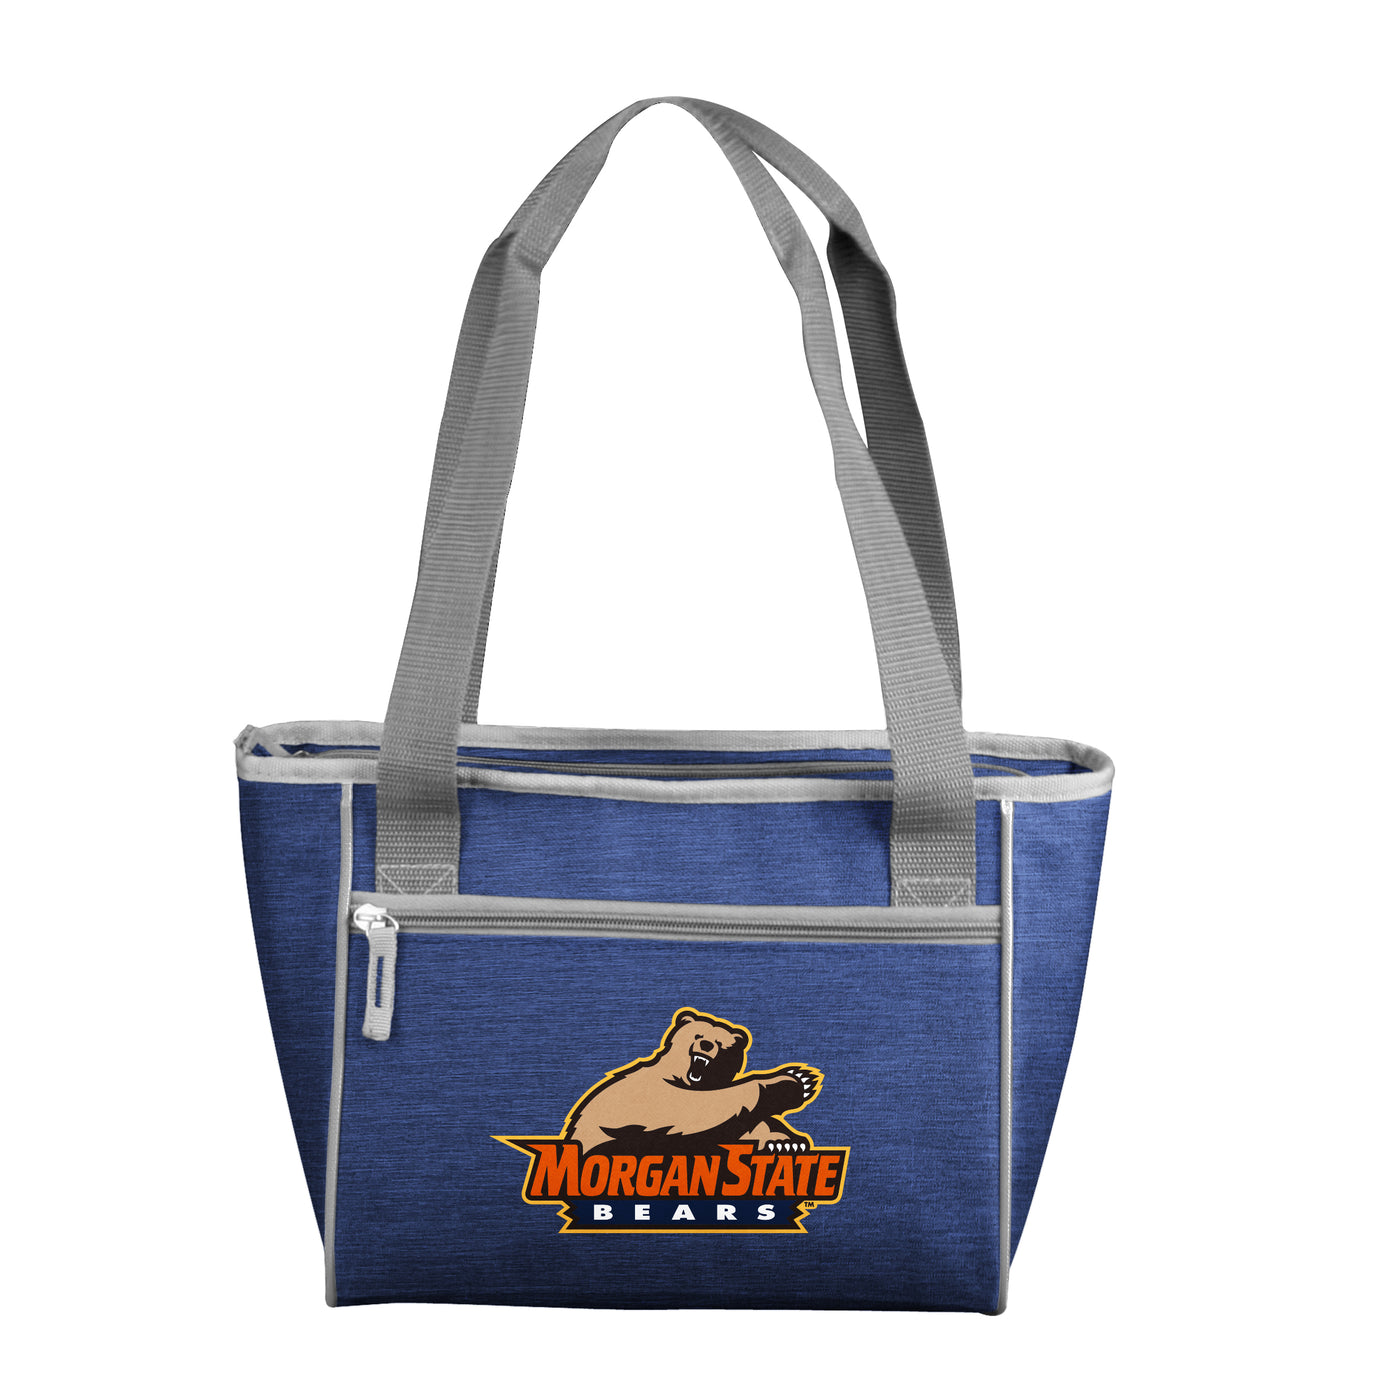 Morgan State 16 Can Cooler Tote